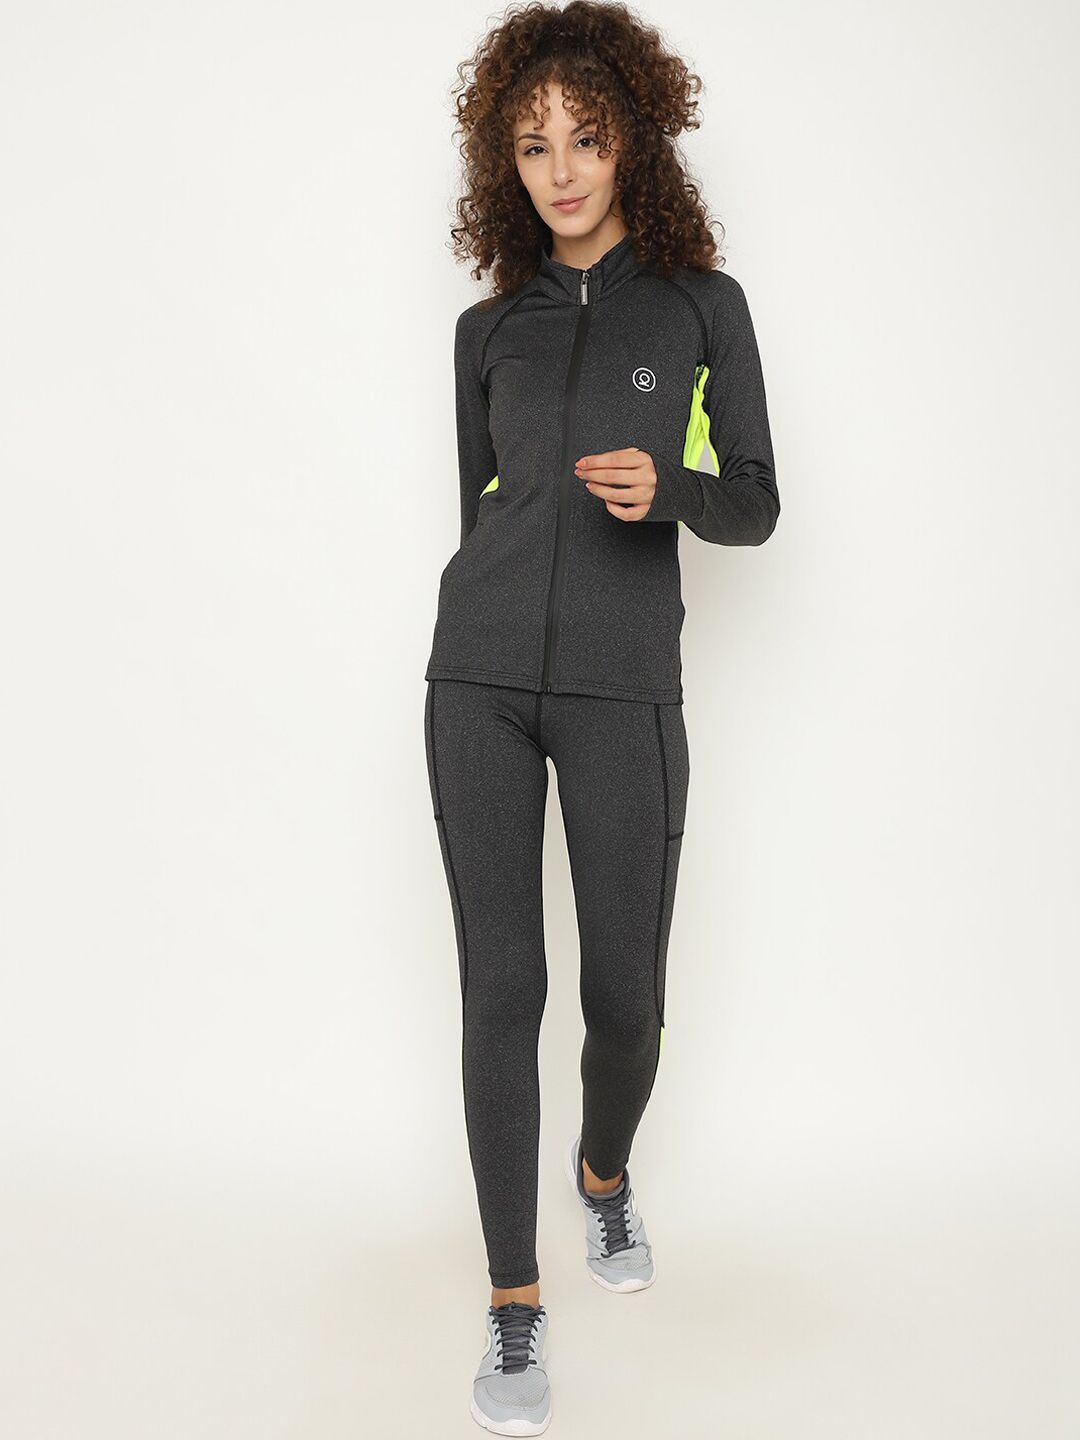 Chkokko Women Grey & Green Colourblocked Solid Sports Tracksuit Price in India